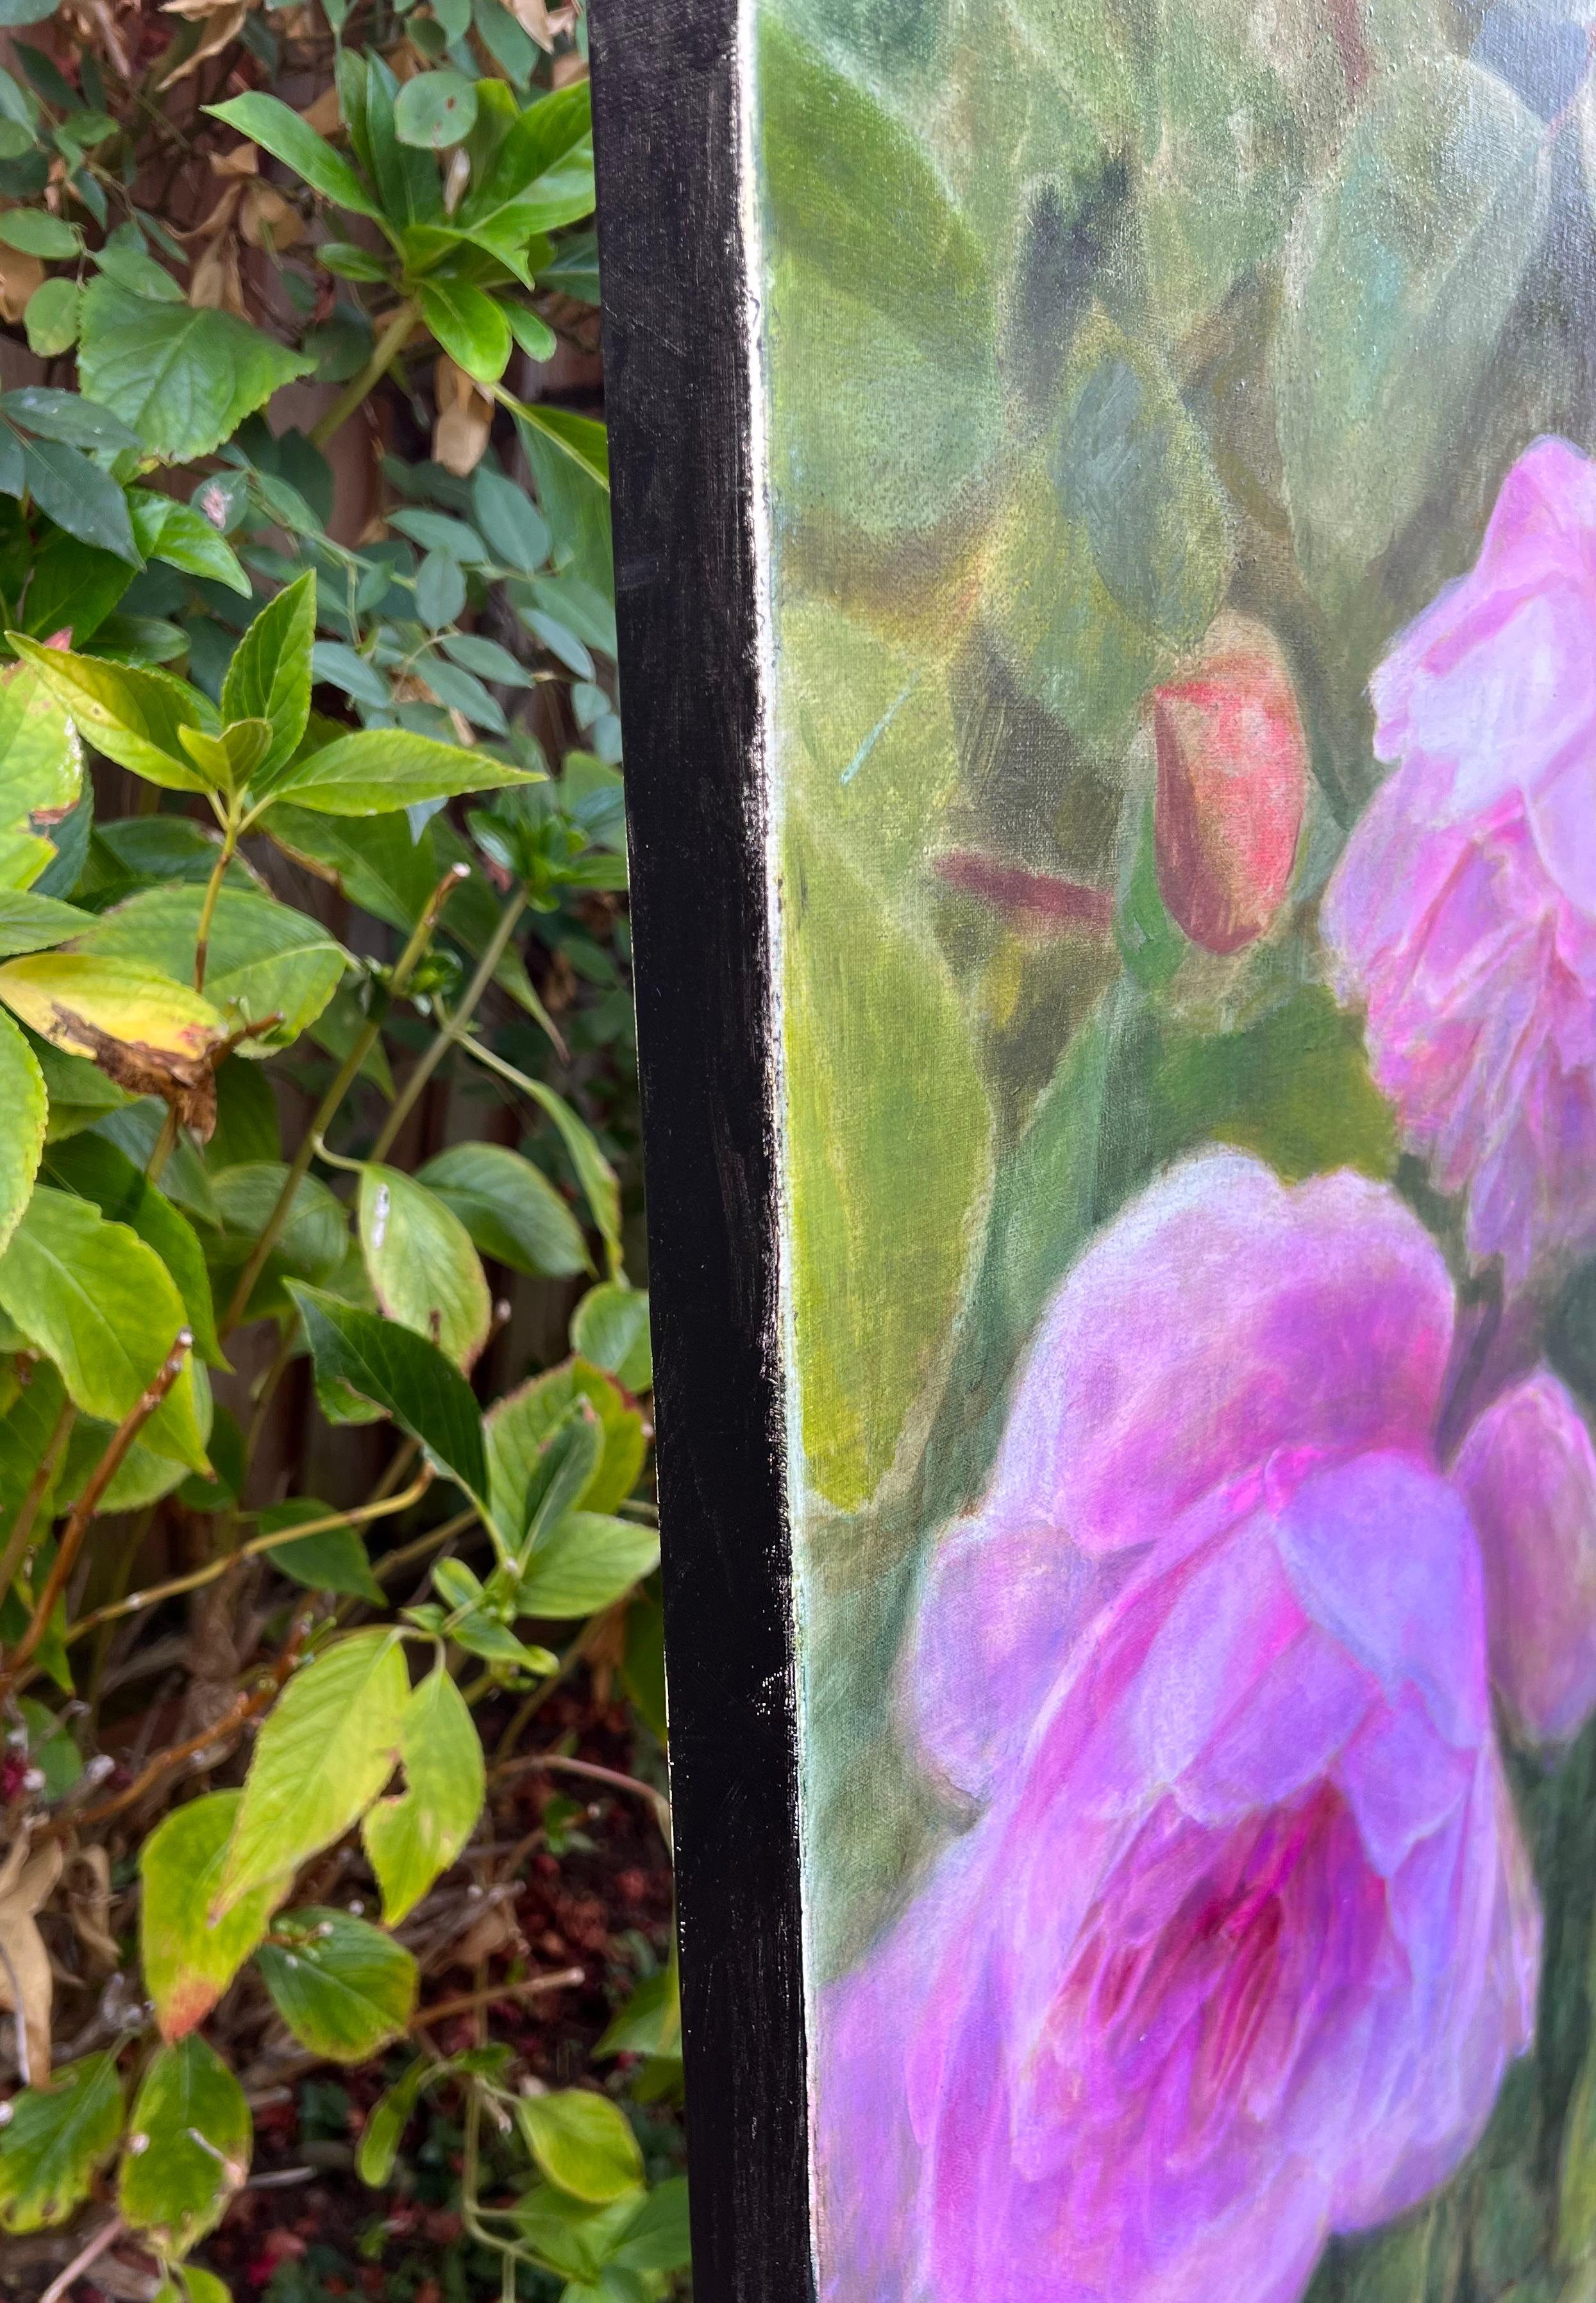 <p>Artist Comments<br>Beneath the bright sunlight, the roses and leaves shine vibrantly. The flowers' edges are wrapped in a soft glow, and the lush greens burst with a natural radiance. The way colors and light mix together brings a luminous effect